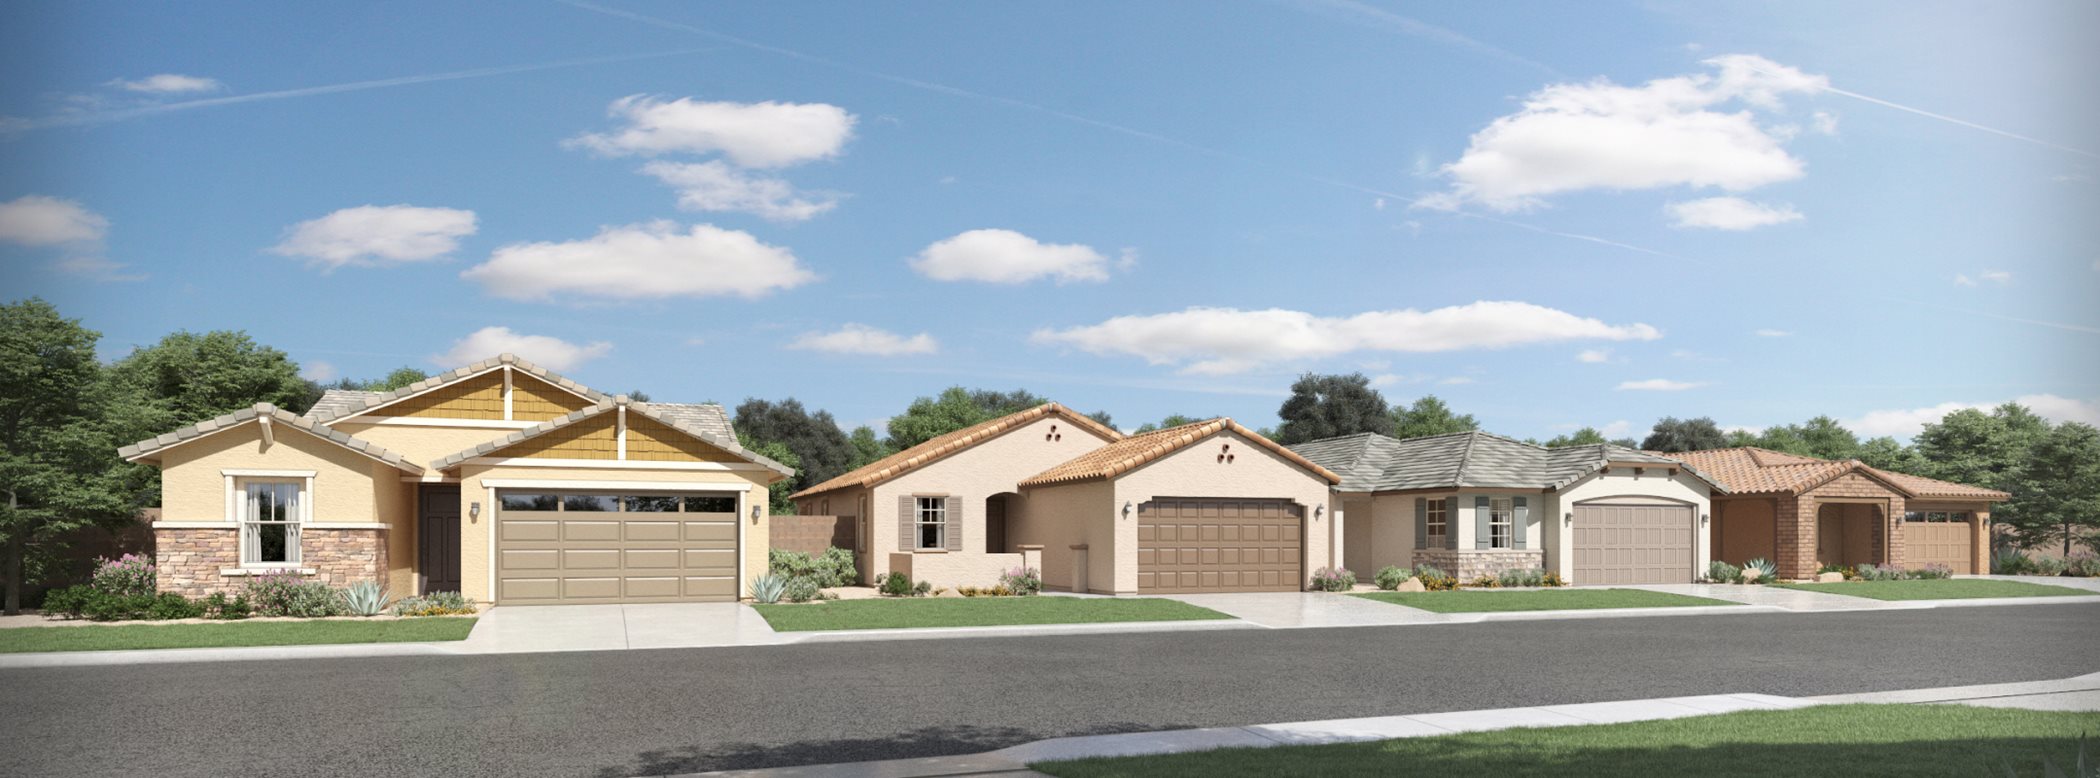 Homes in the discovery collection at Middle Vista